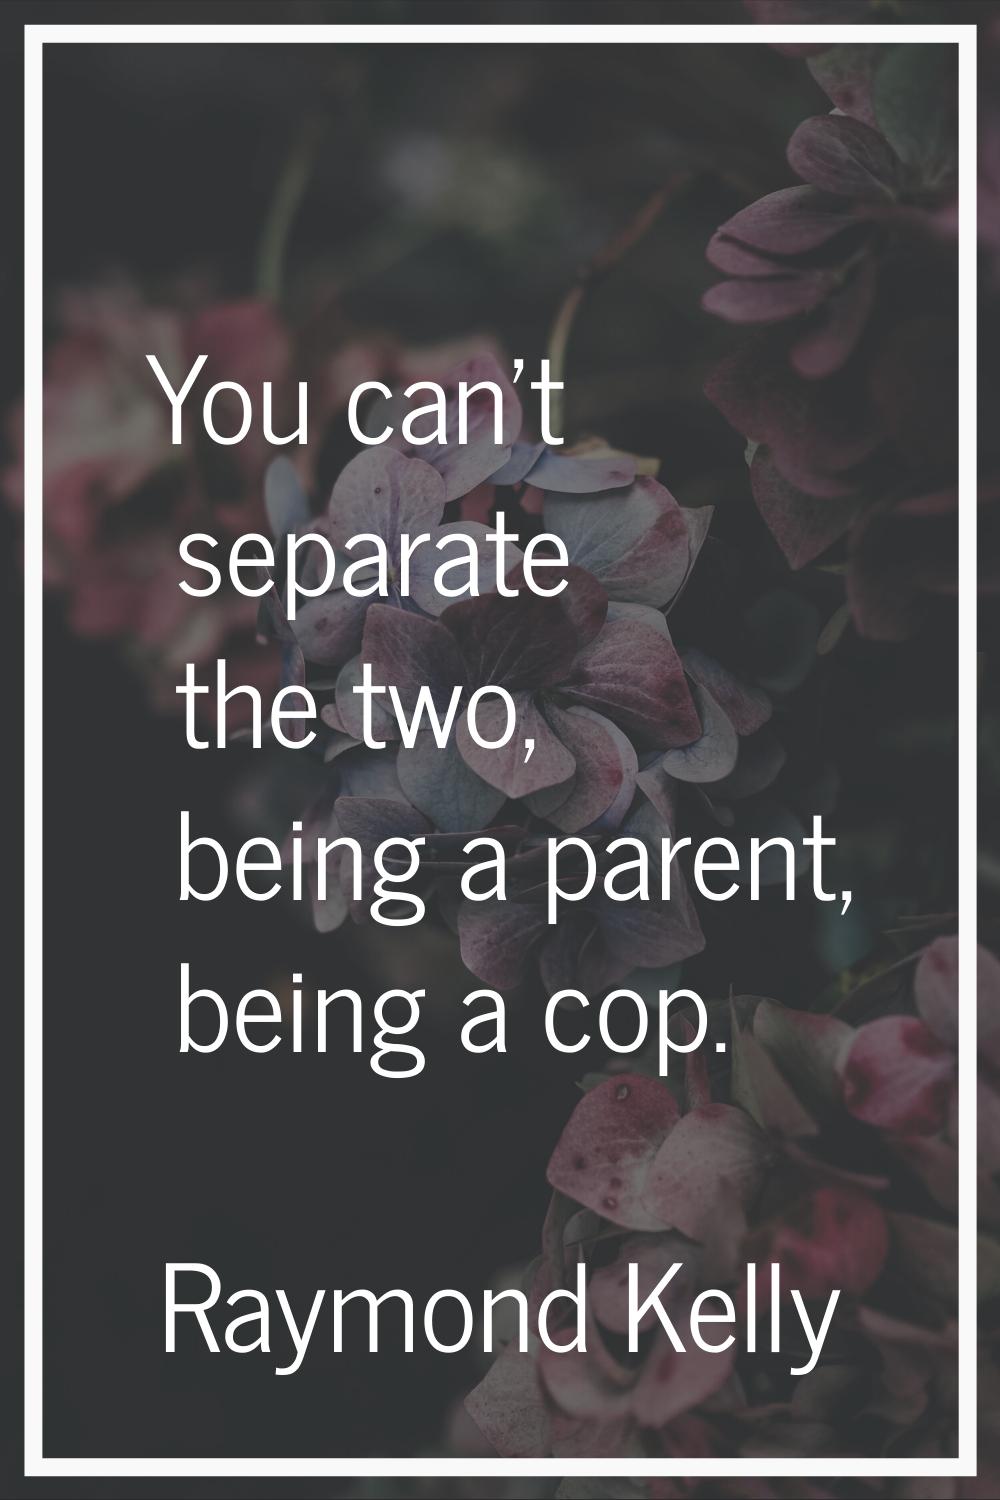 You can't separate the two, being a parent, being a cop.